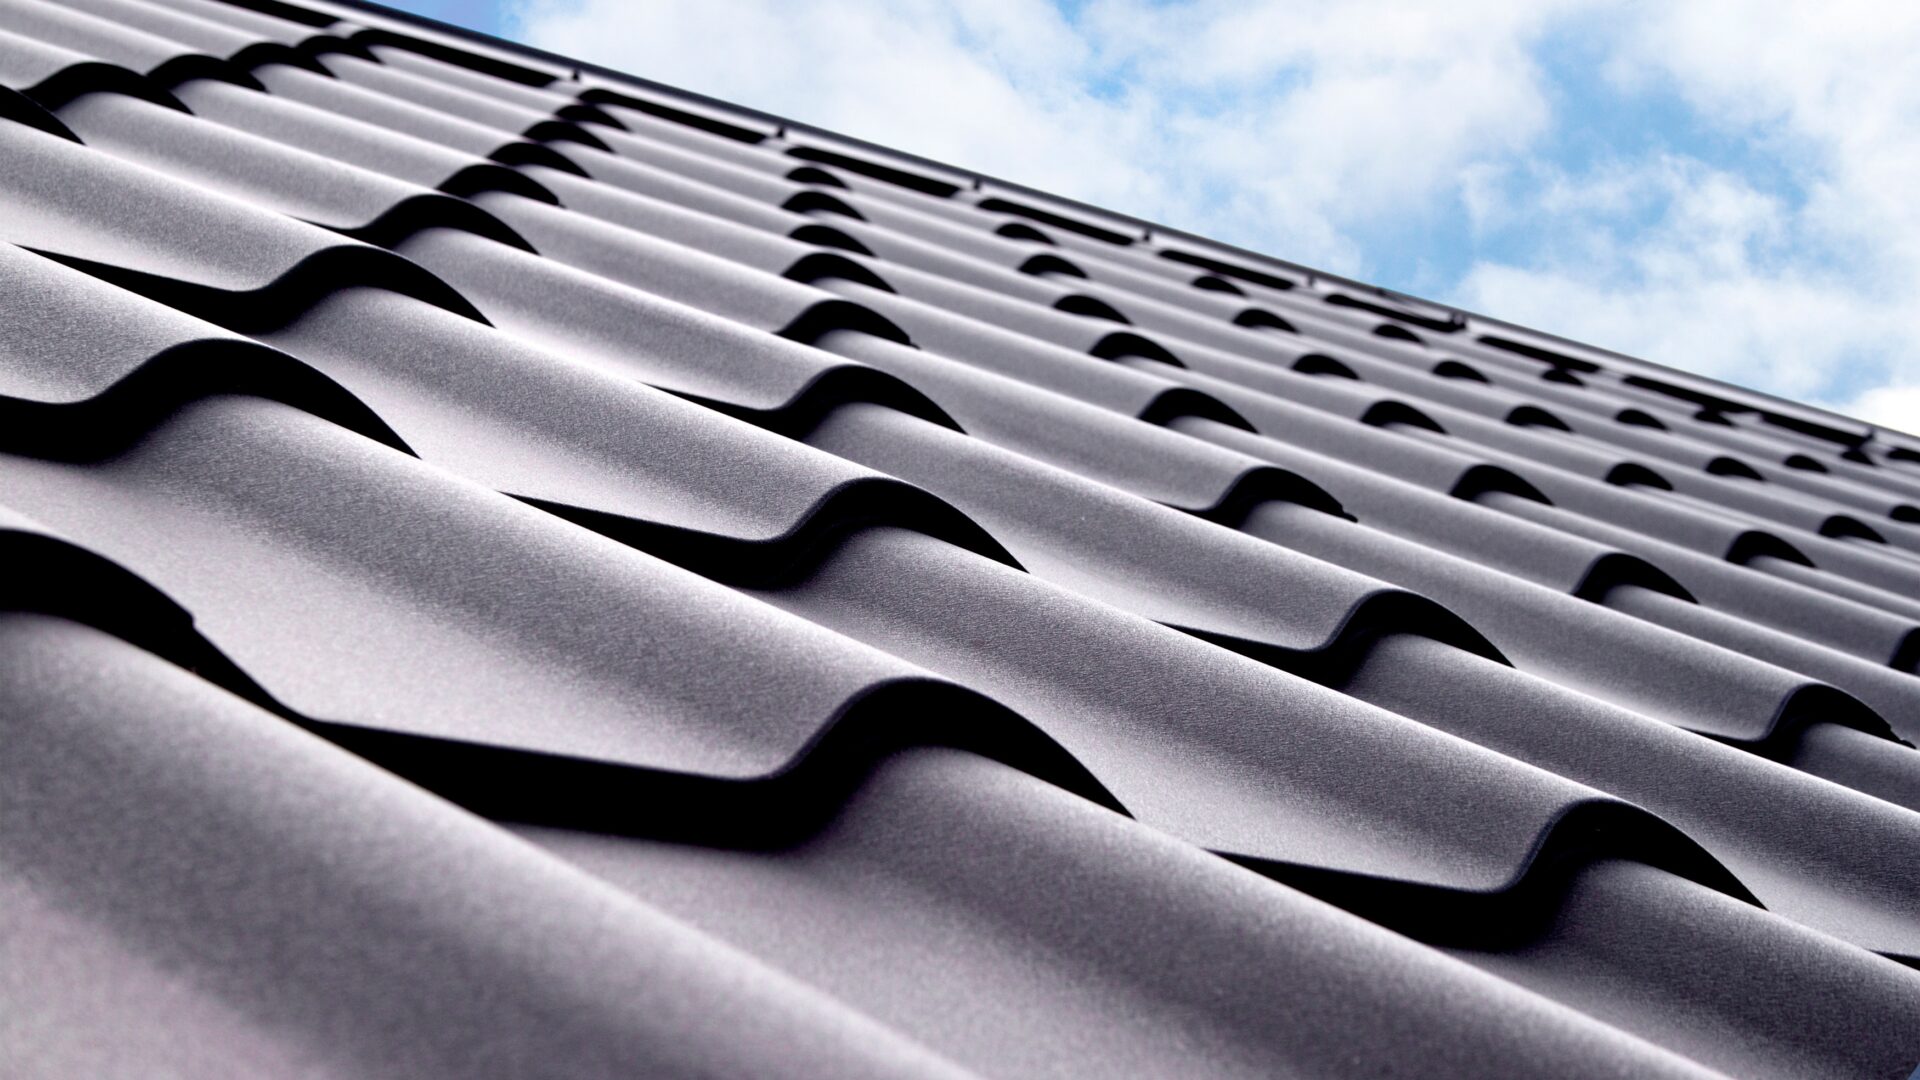 Closeup of black tile roofing